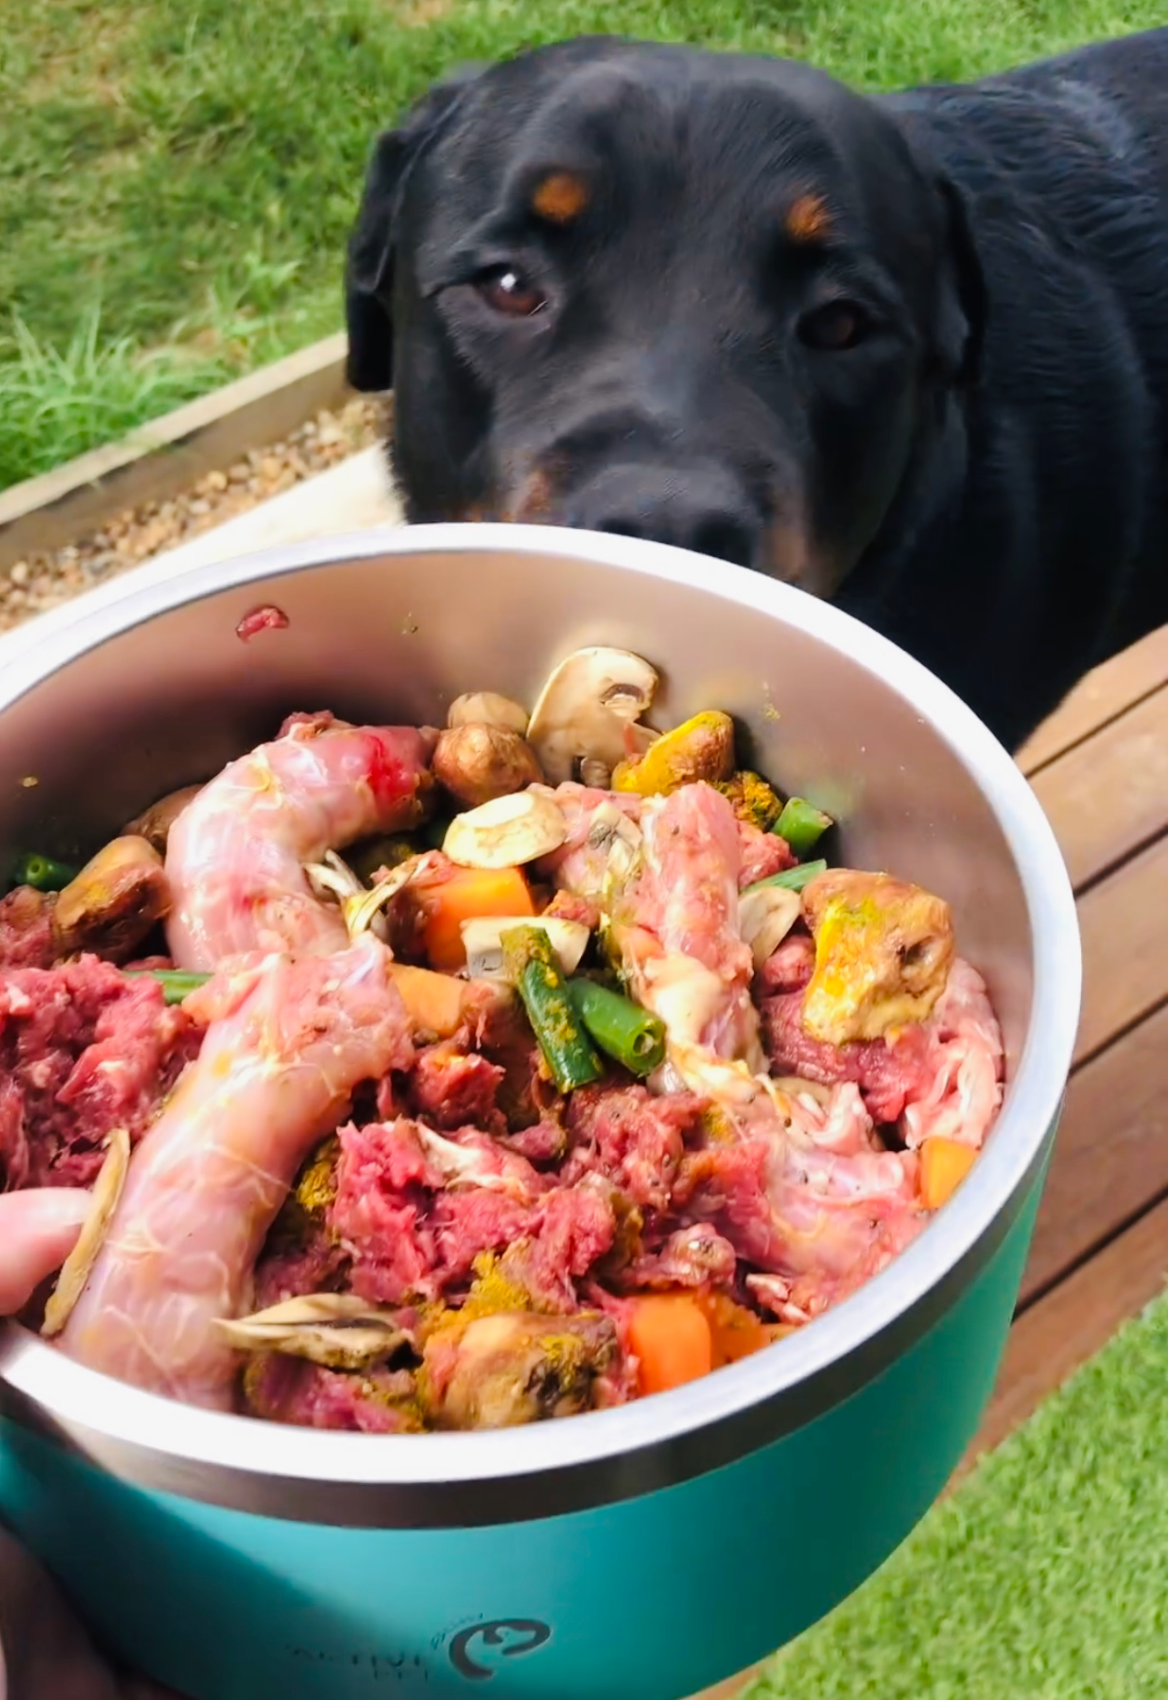 The Starter Guide To Raw Feeding Your Dog